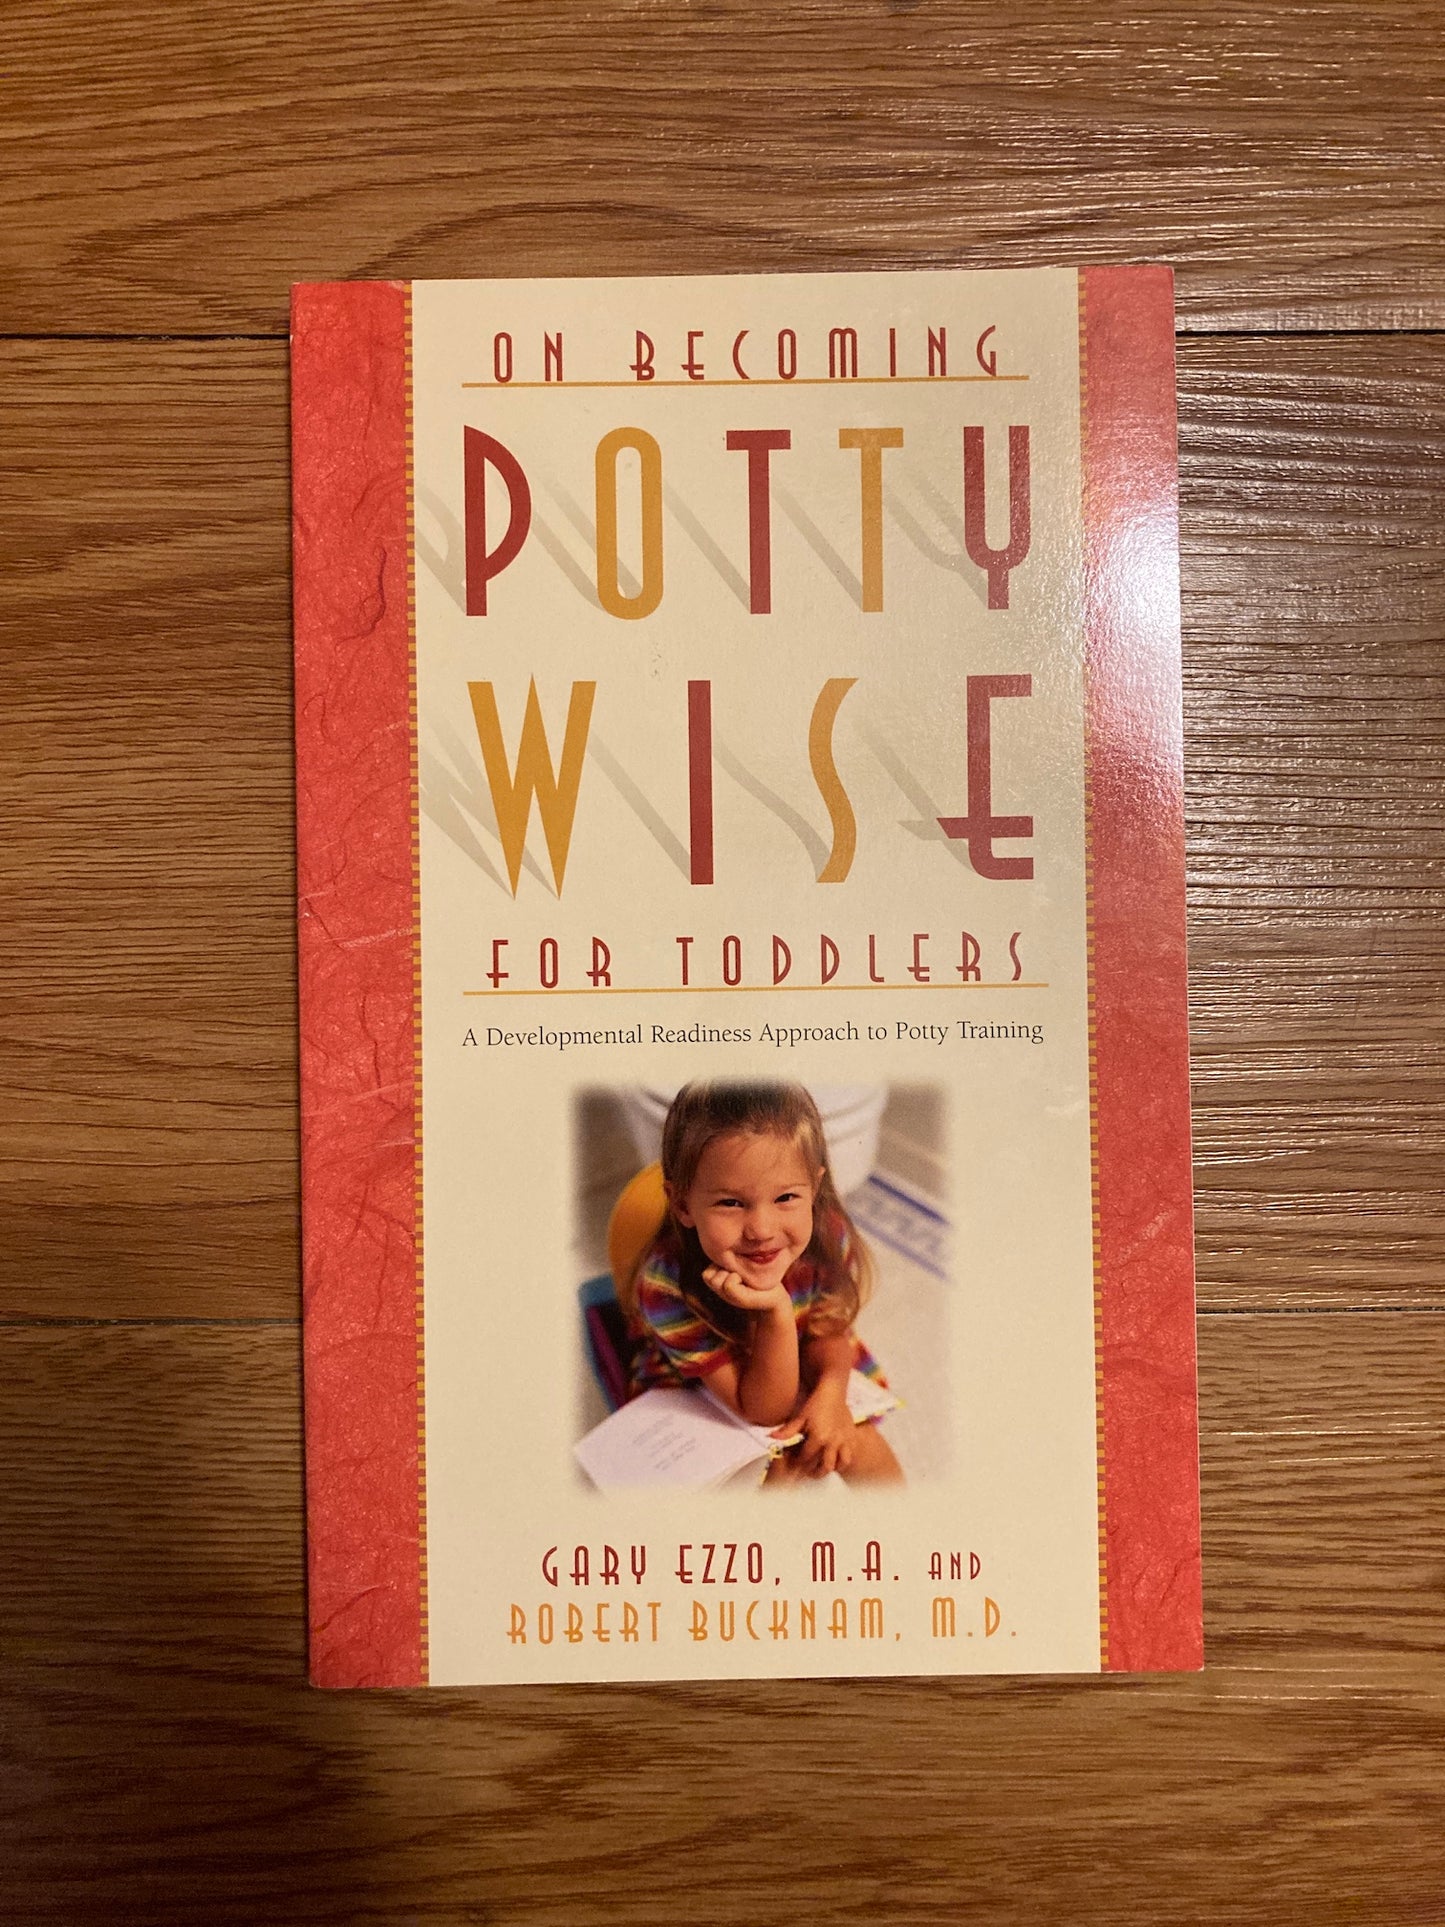 On Becoming Potty Wise for Toddlers: A Developmental Readiness